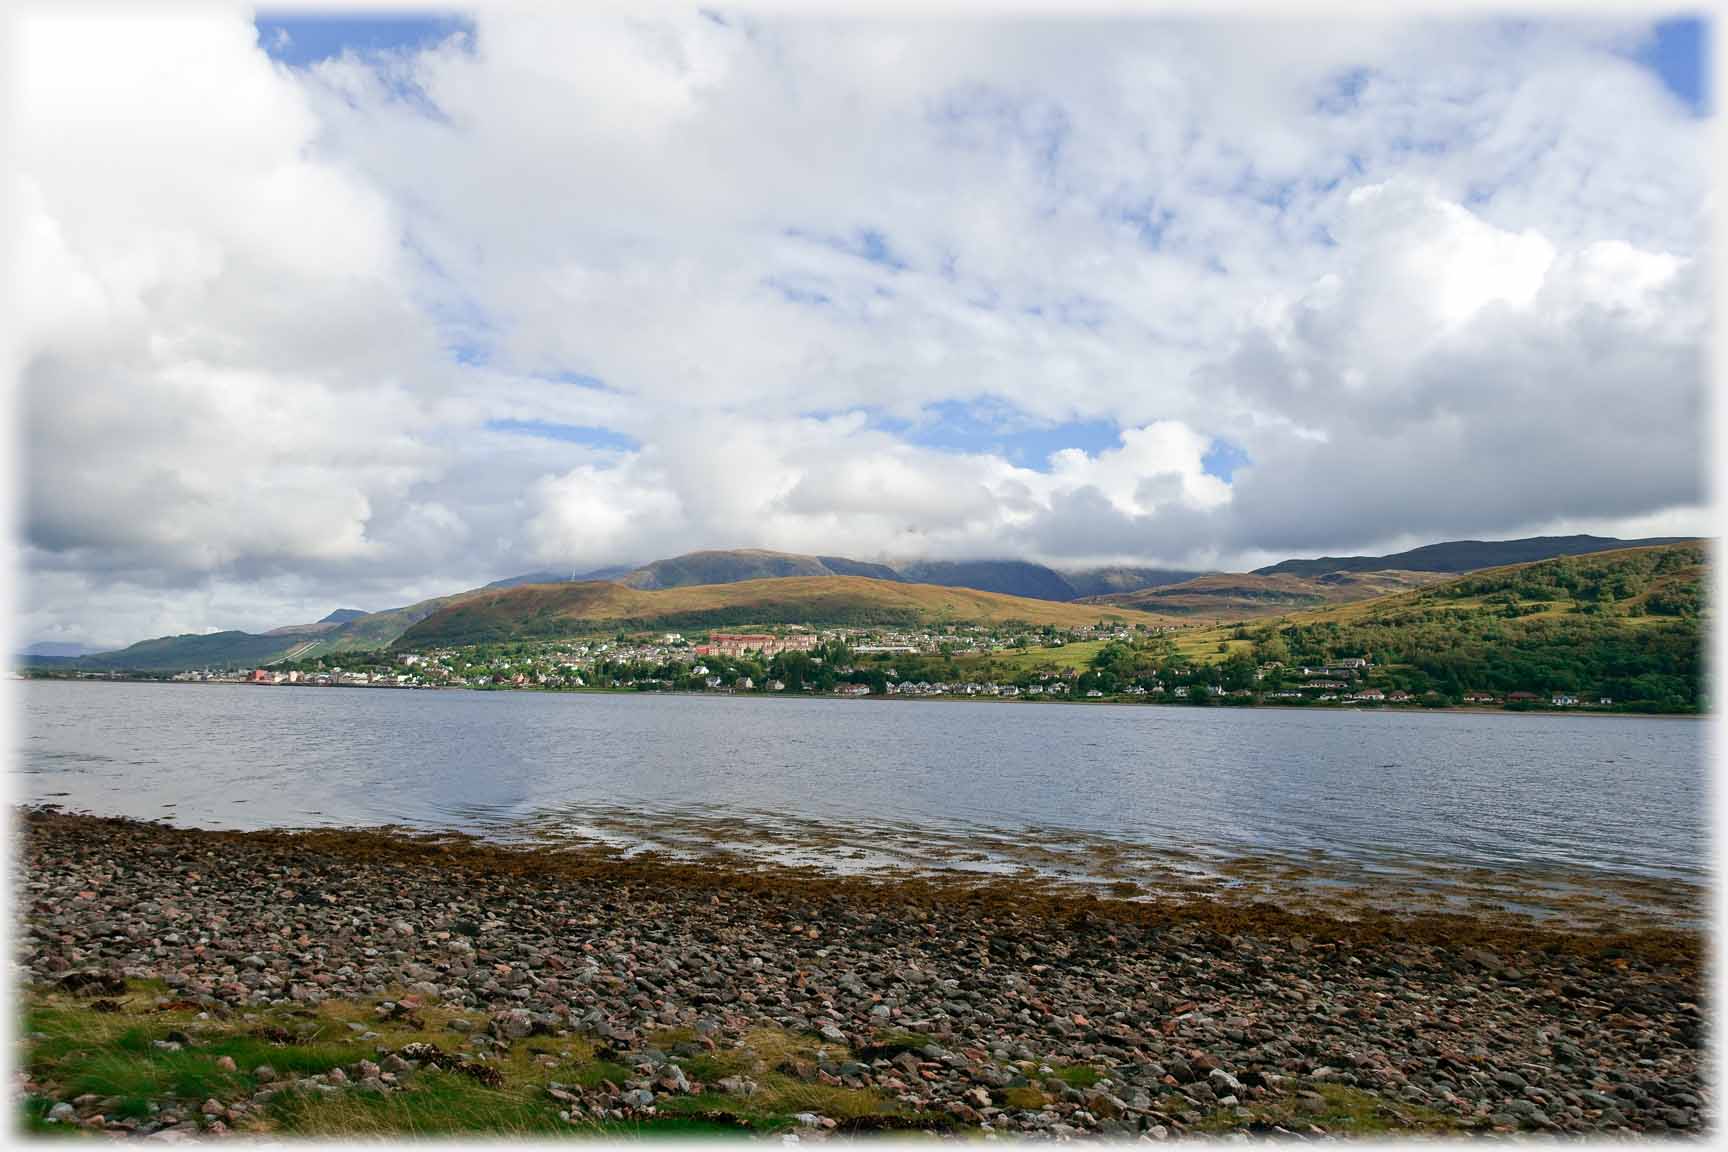 Looking across loch to distant town spreading across hillside down to water.